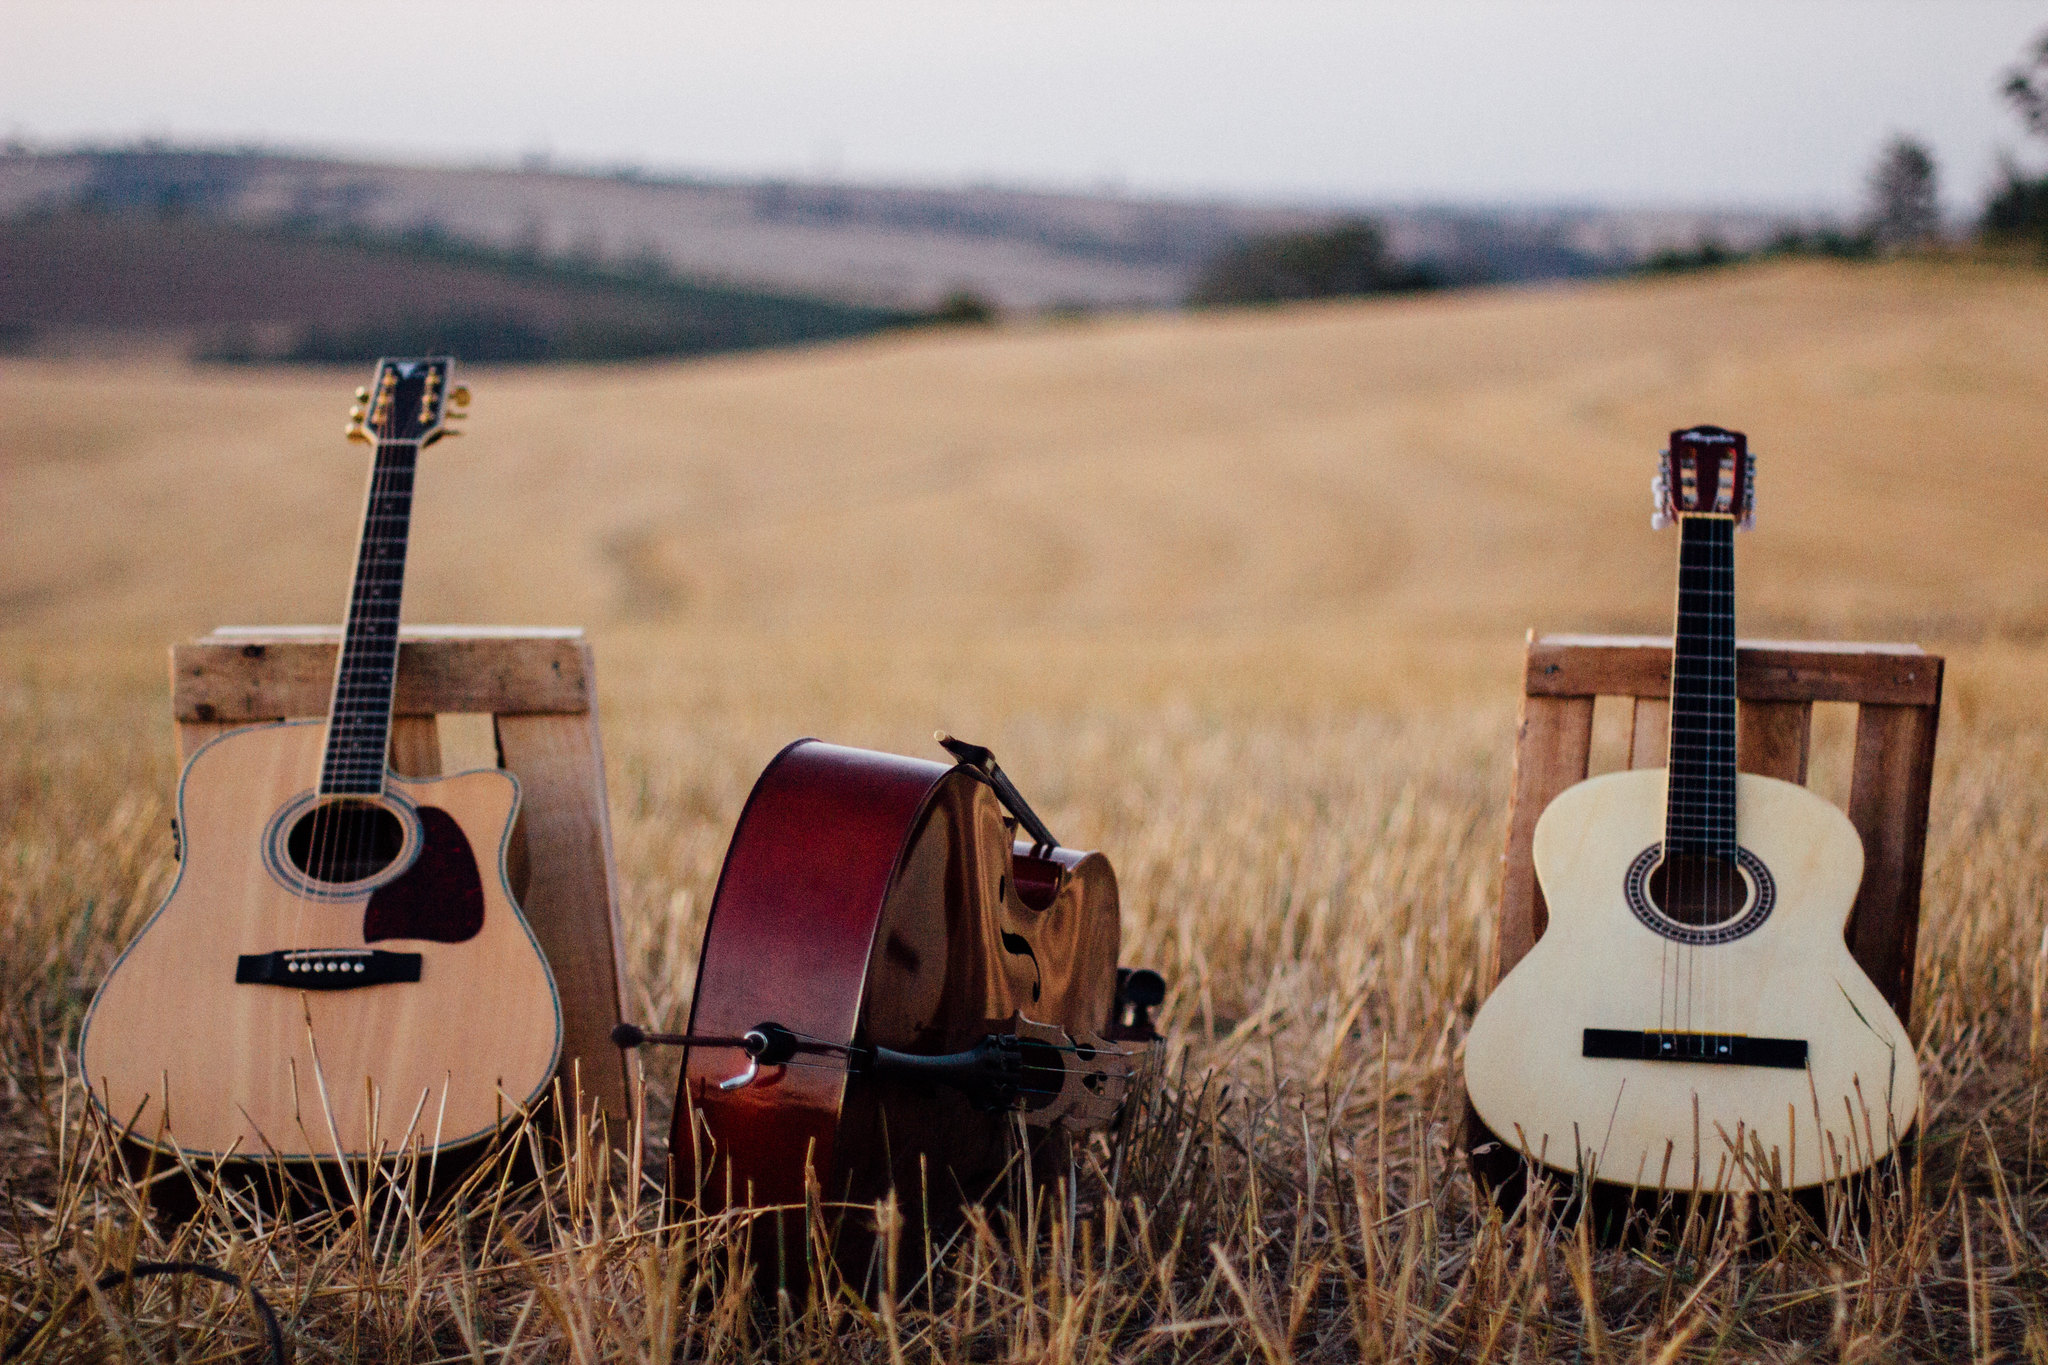 Guitars and bass in a field